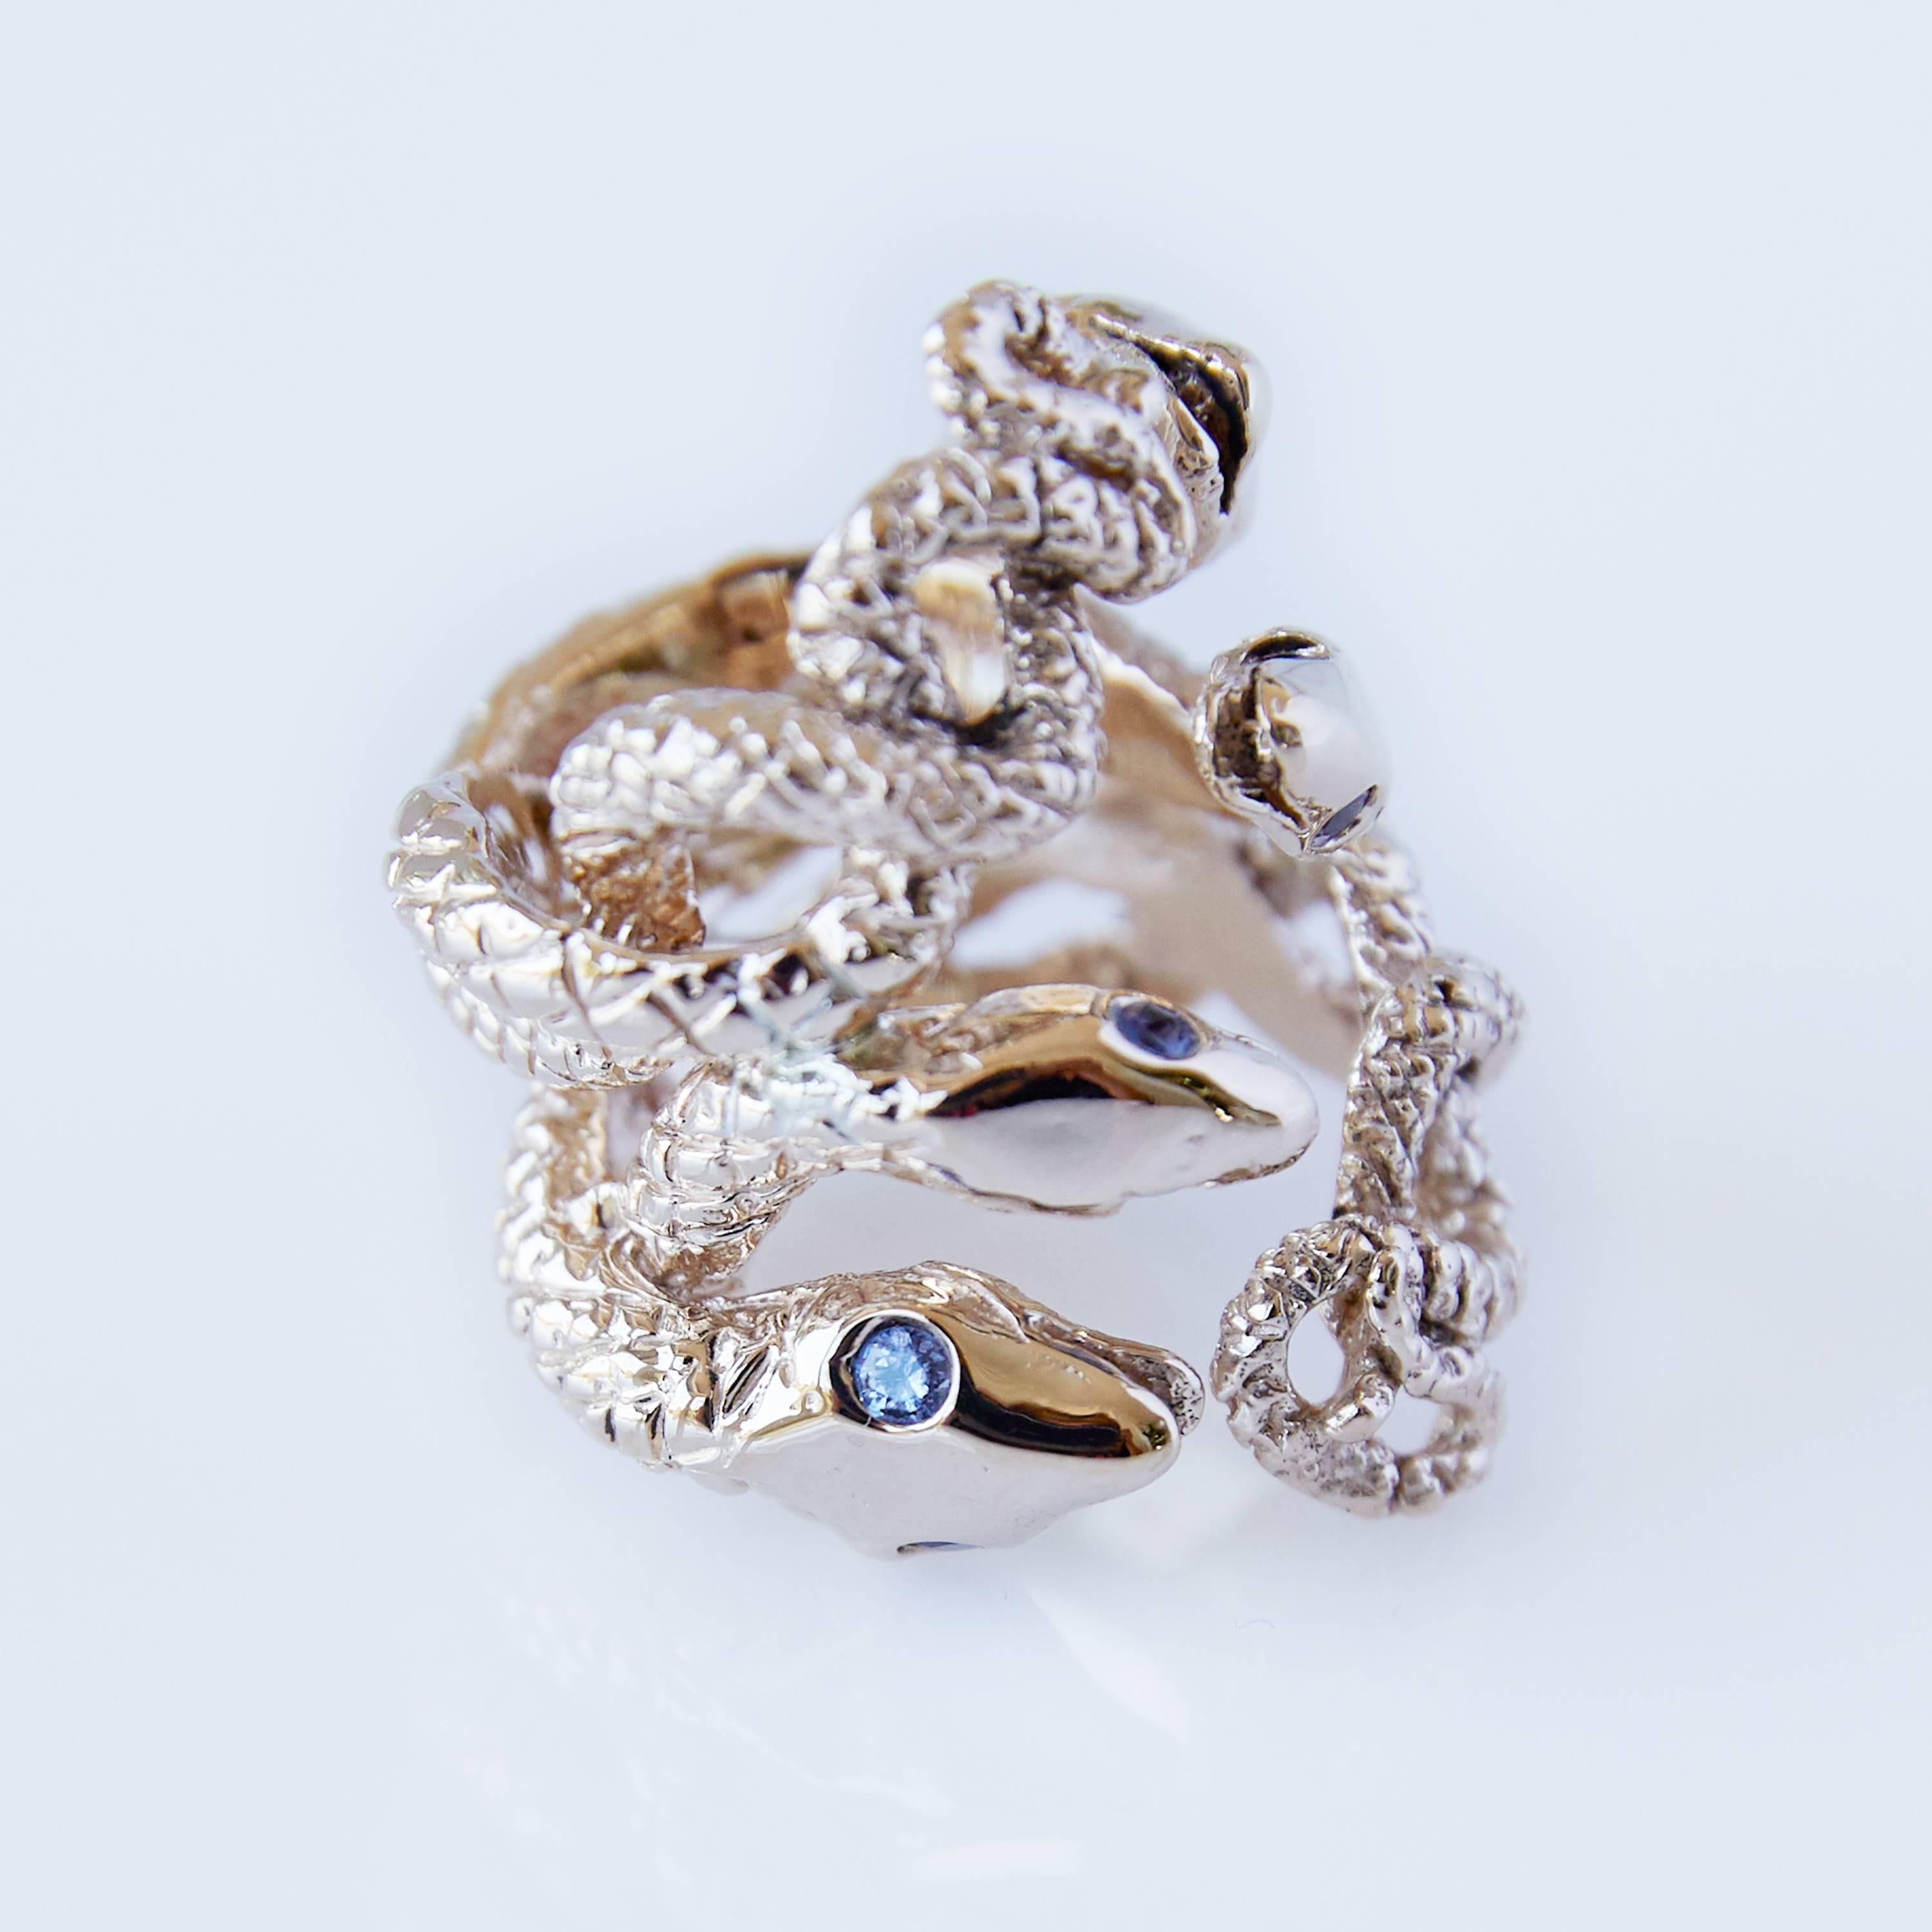 Contemporary Statement Snake Ring Cocktail Ring Tanzanite Animal jewelry  Bronze J Dauphin For Sale